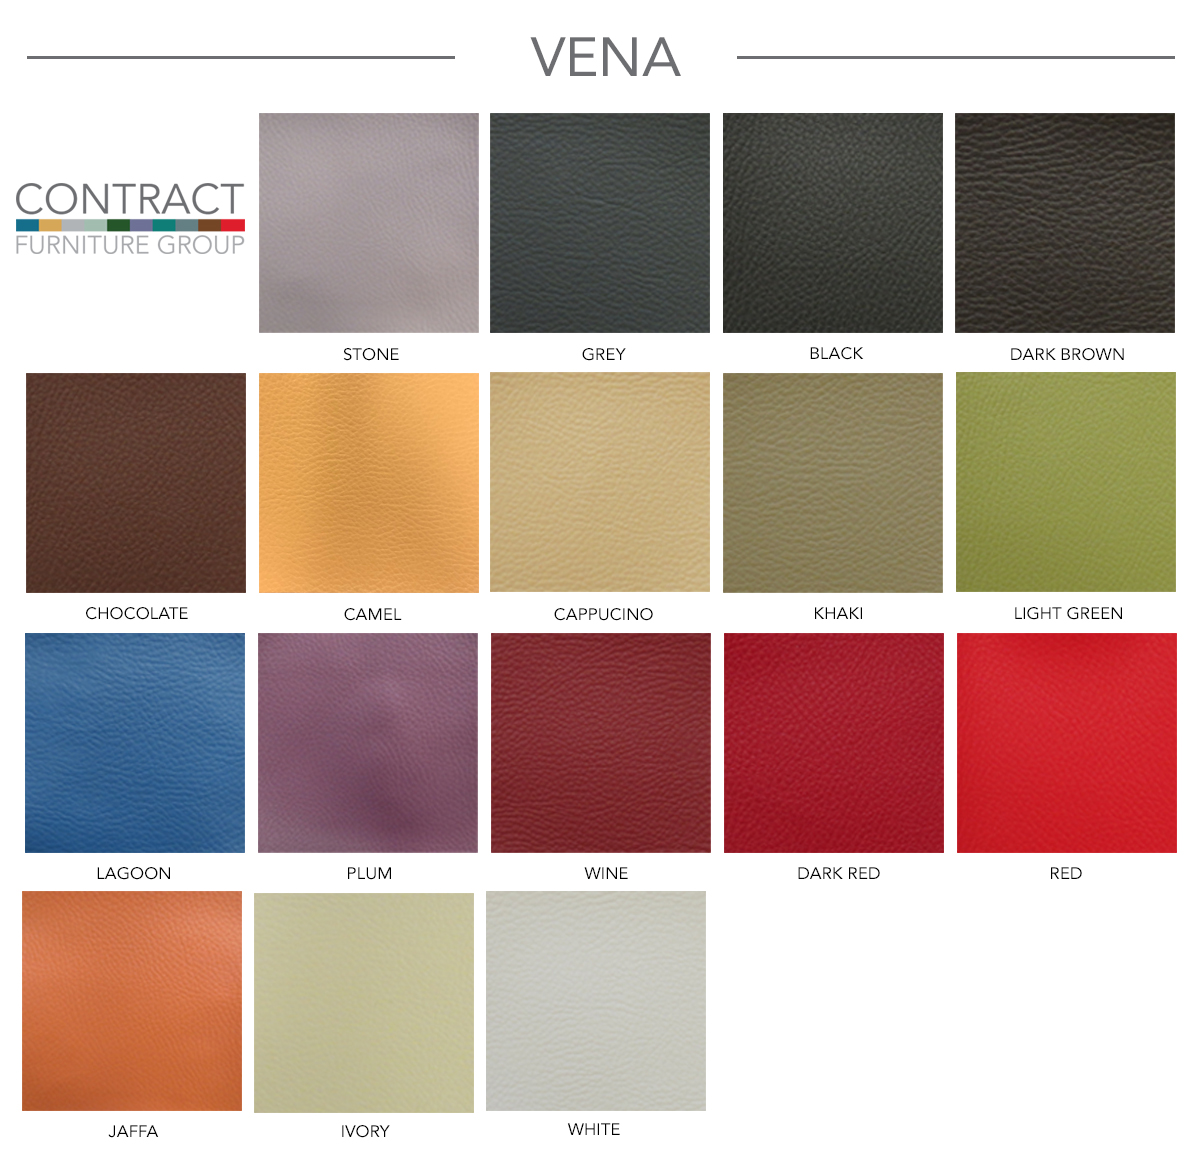 Contract Furniture Group Vena Faux Leather